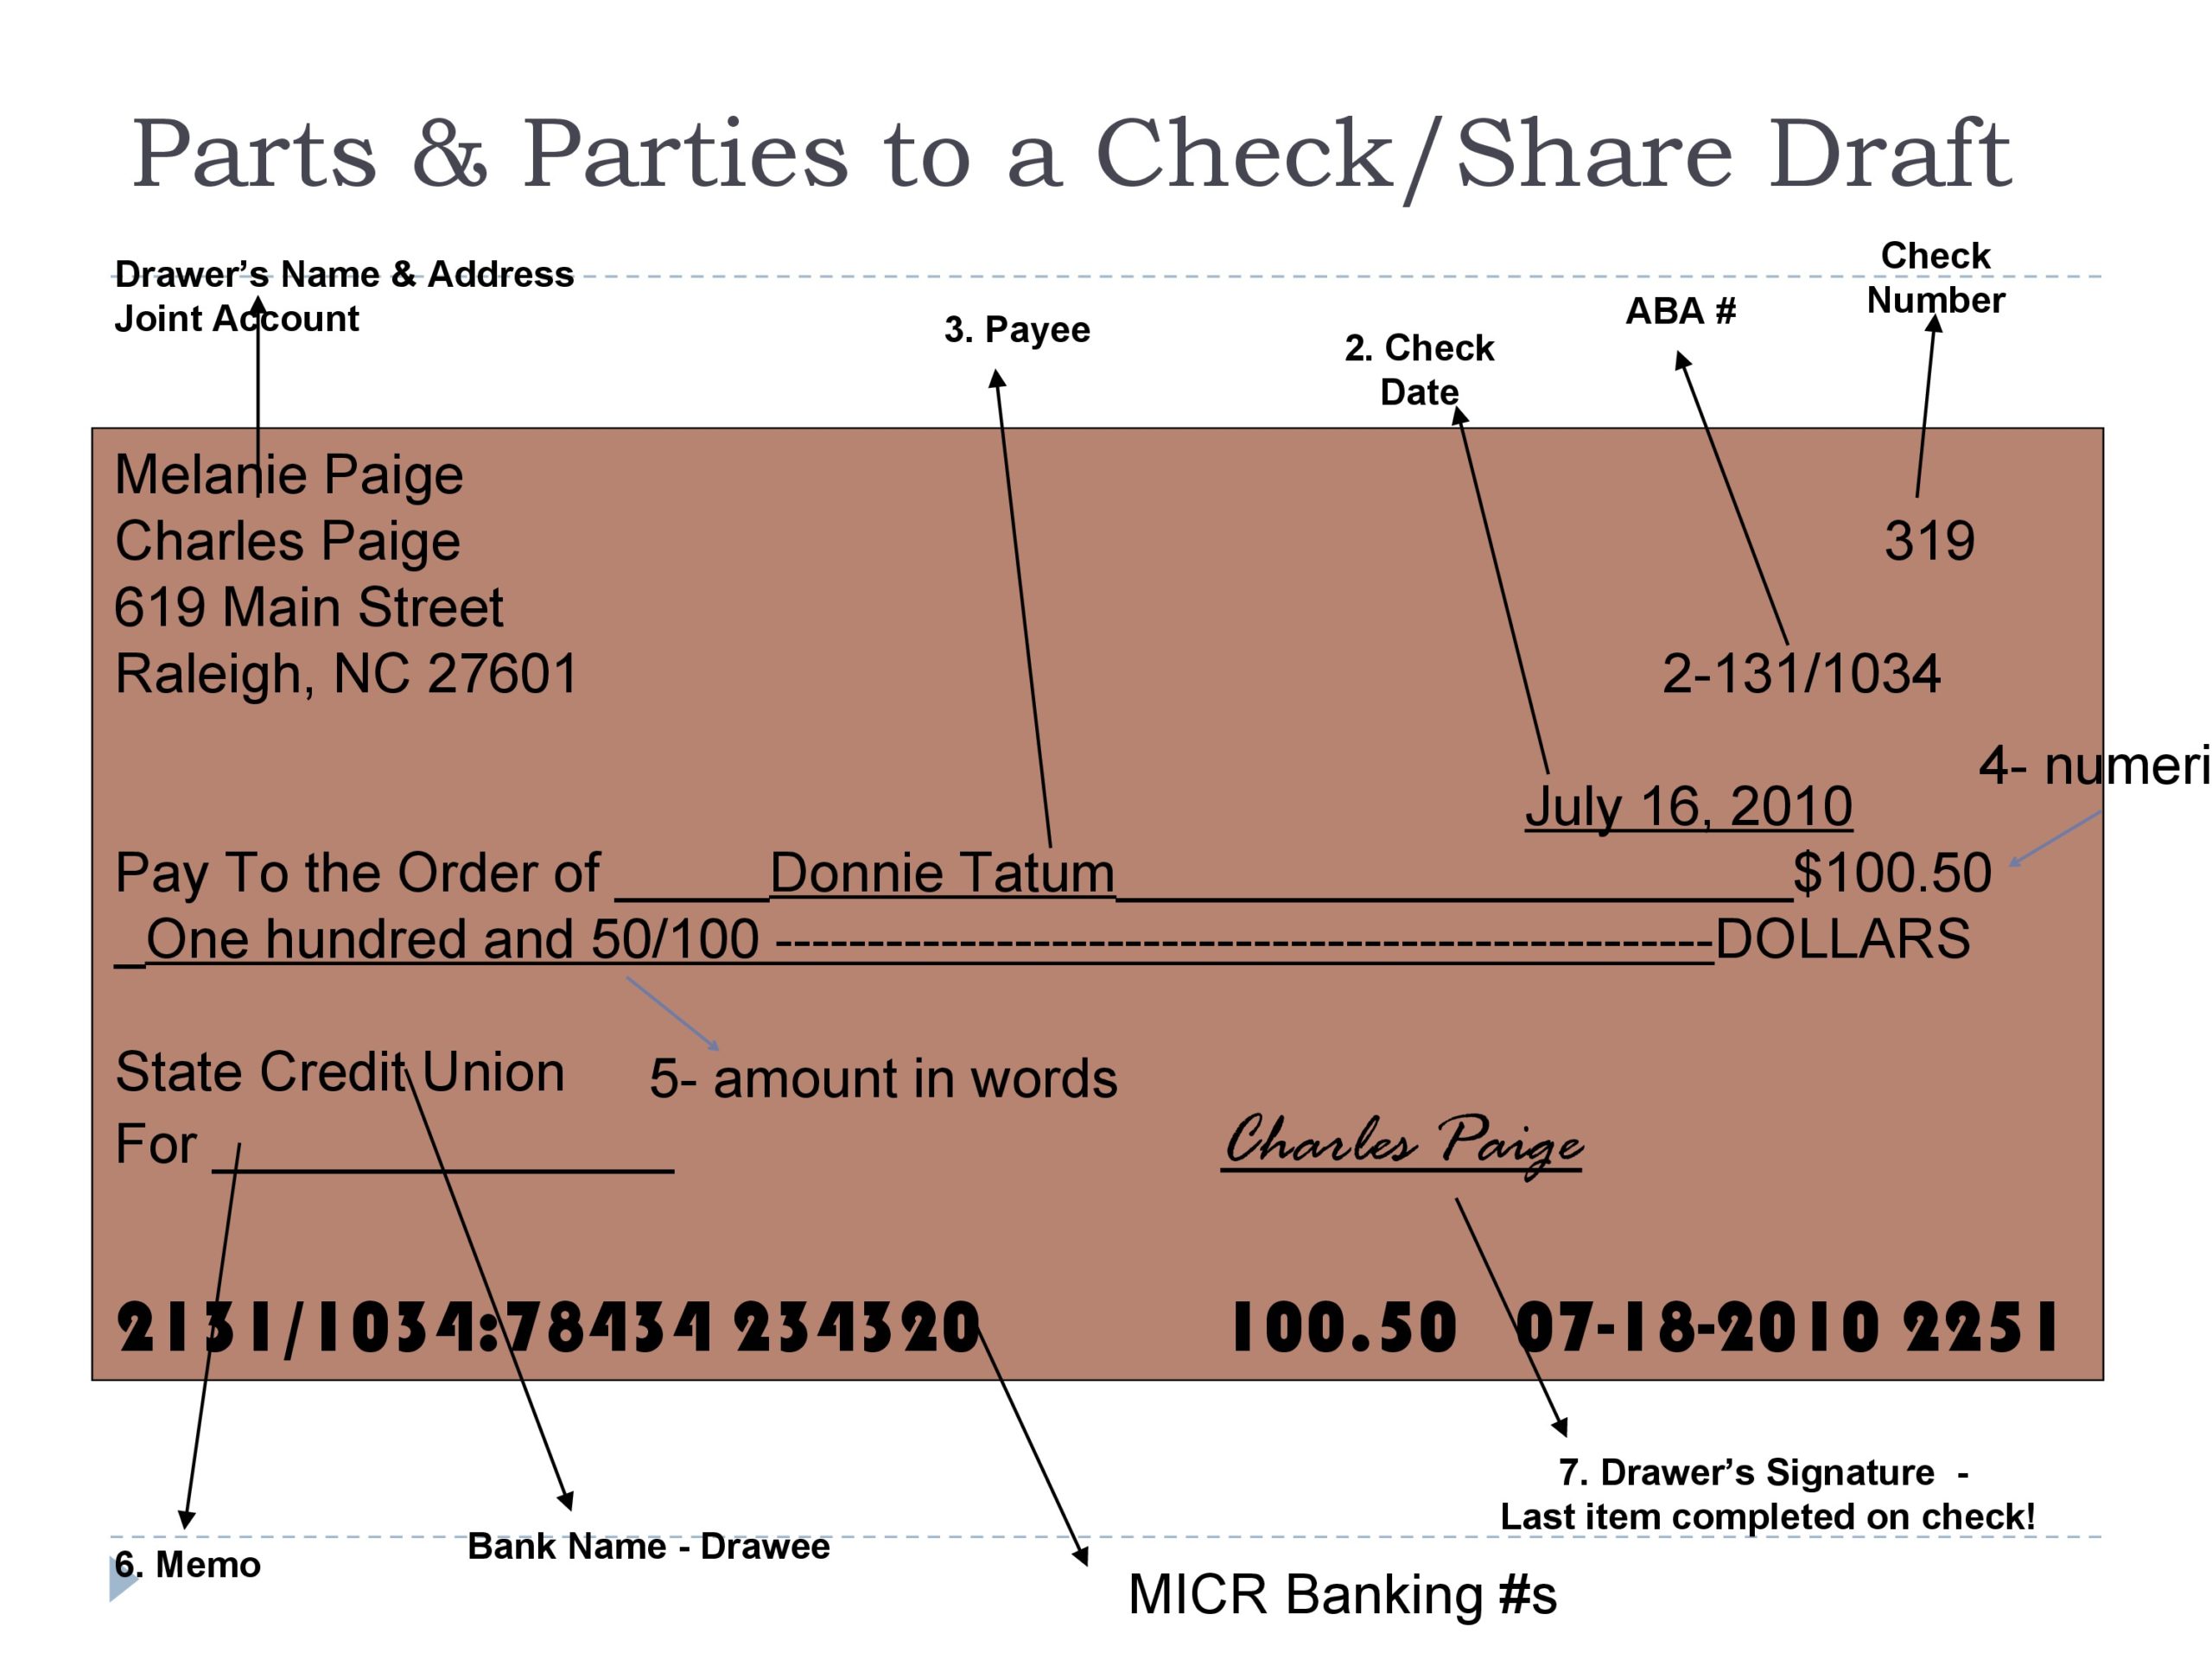 Blank Cheque Example